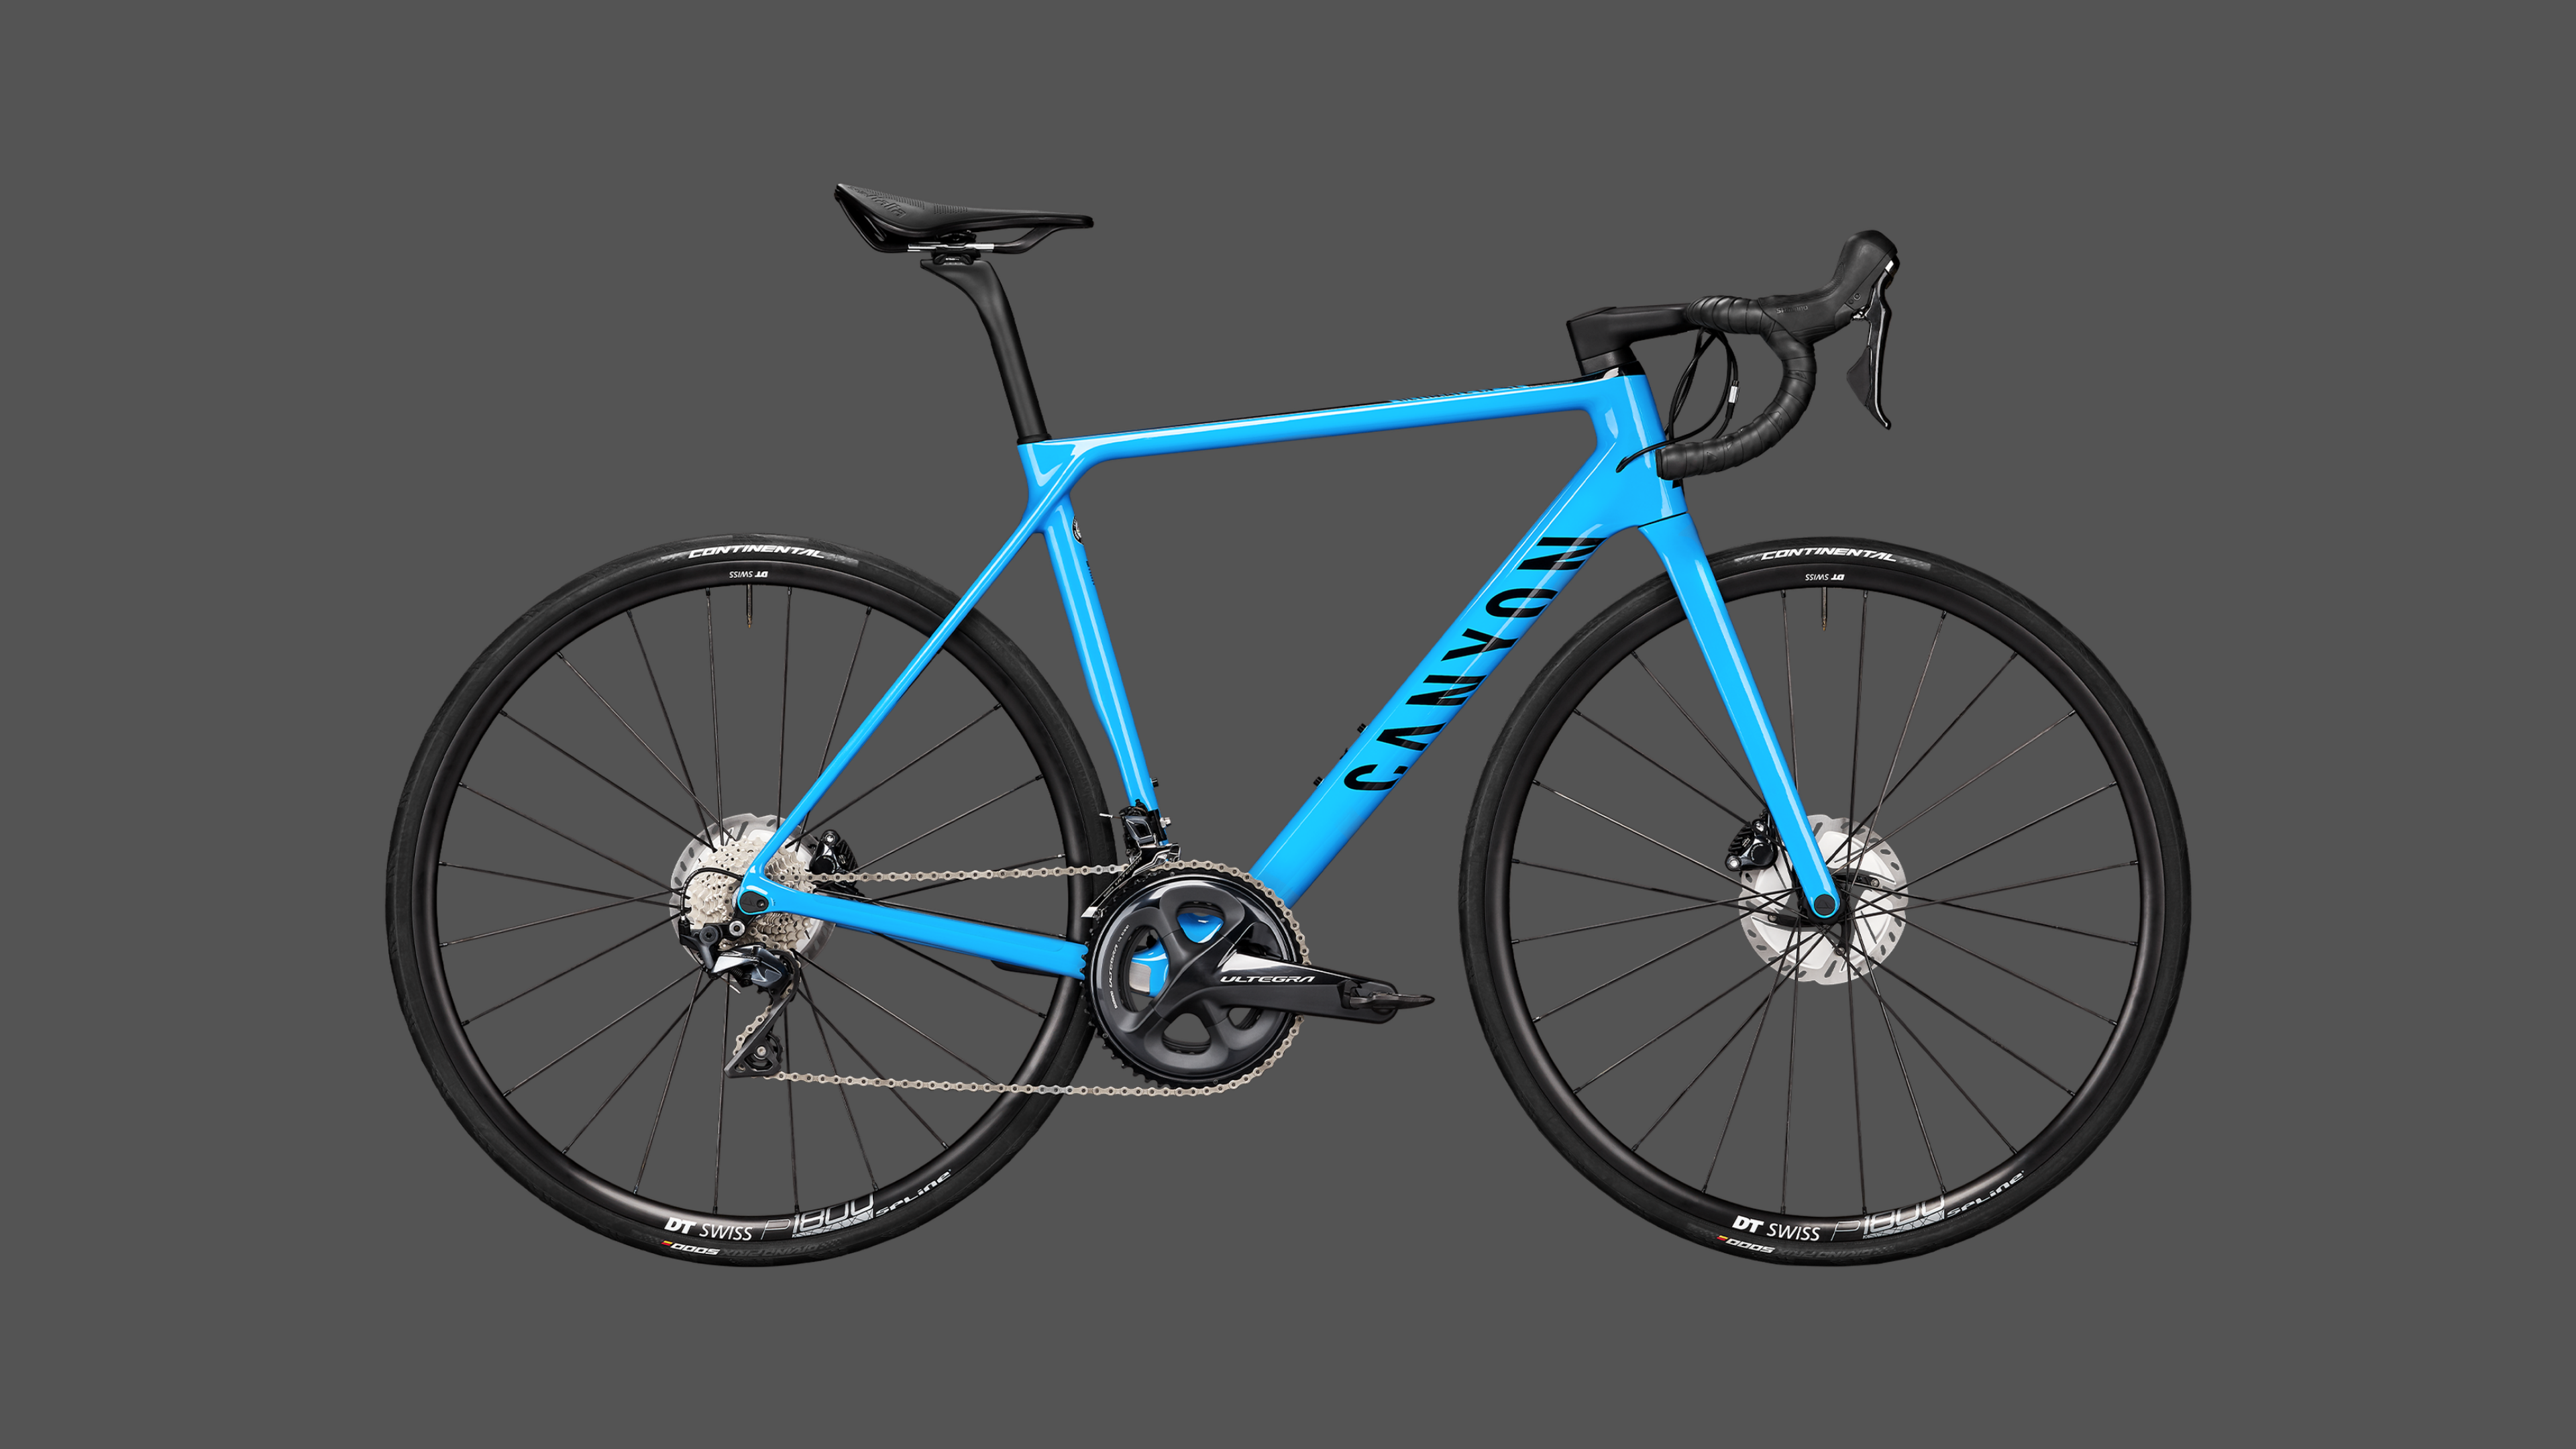 General 3840x2160 bicycle Ultimate CF SL 8 sport Canyon Bicycles cycling gray background cyan simple background digital art